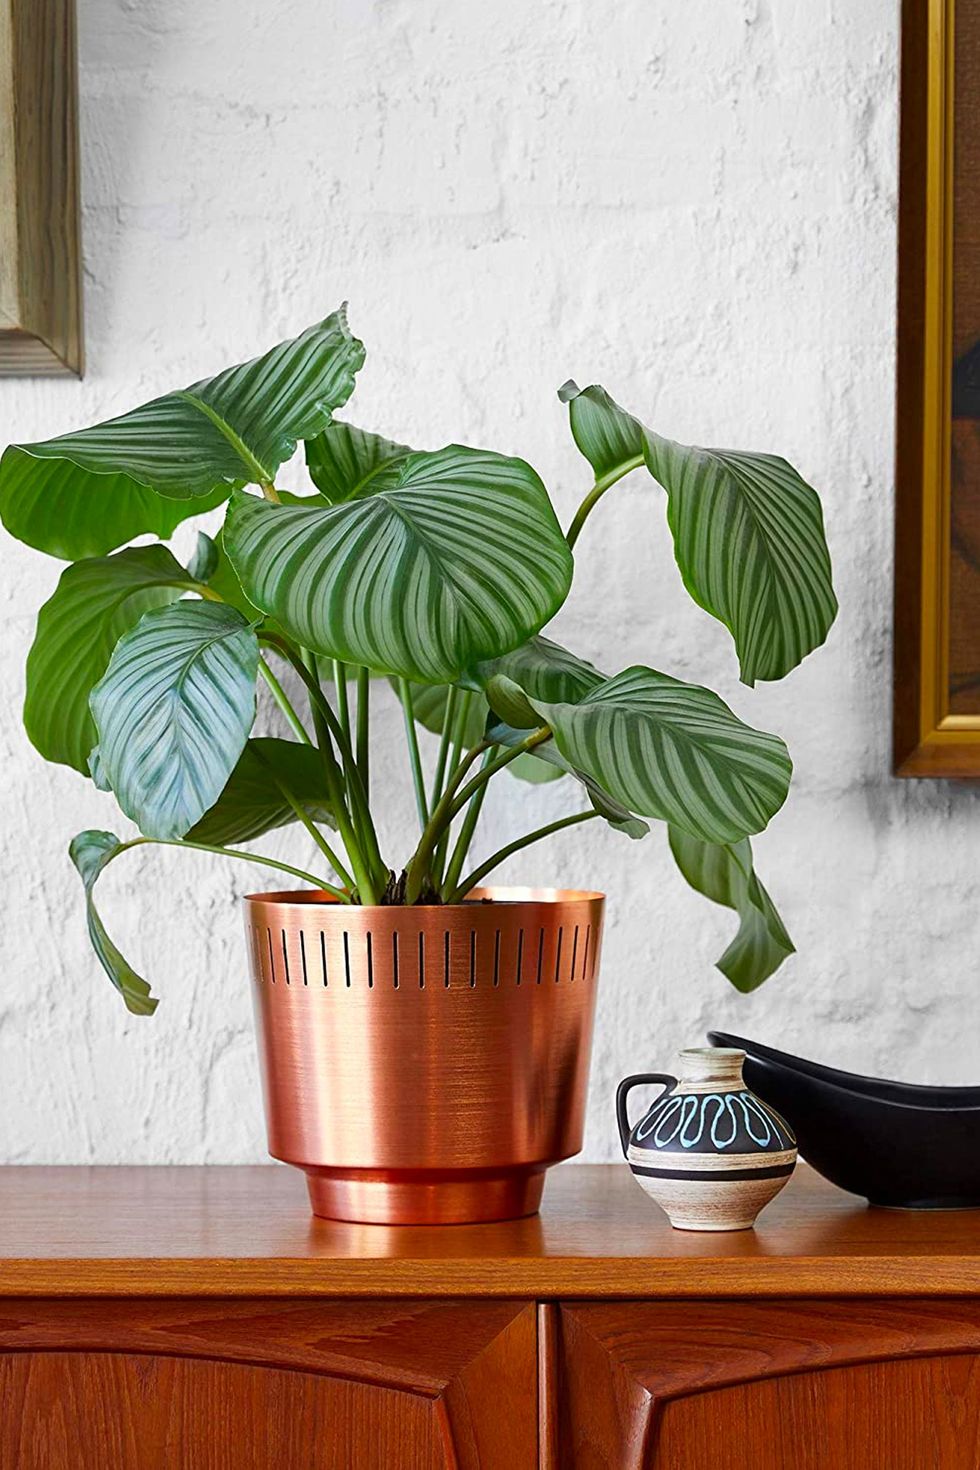 17 Cute Planters to Level up Your Apartment